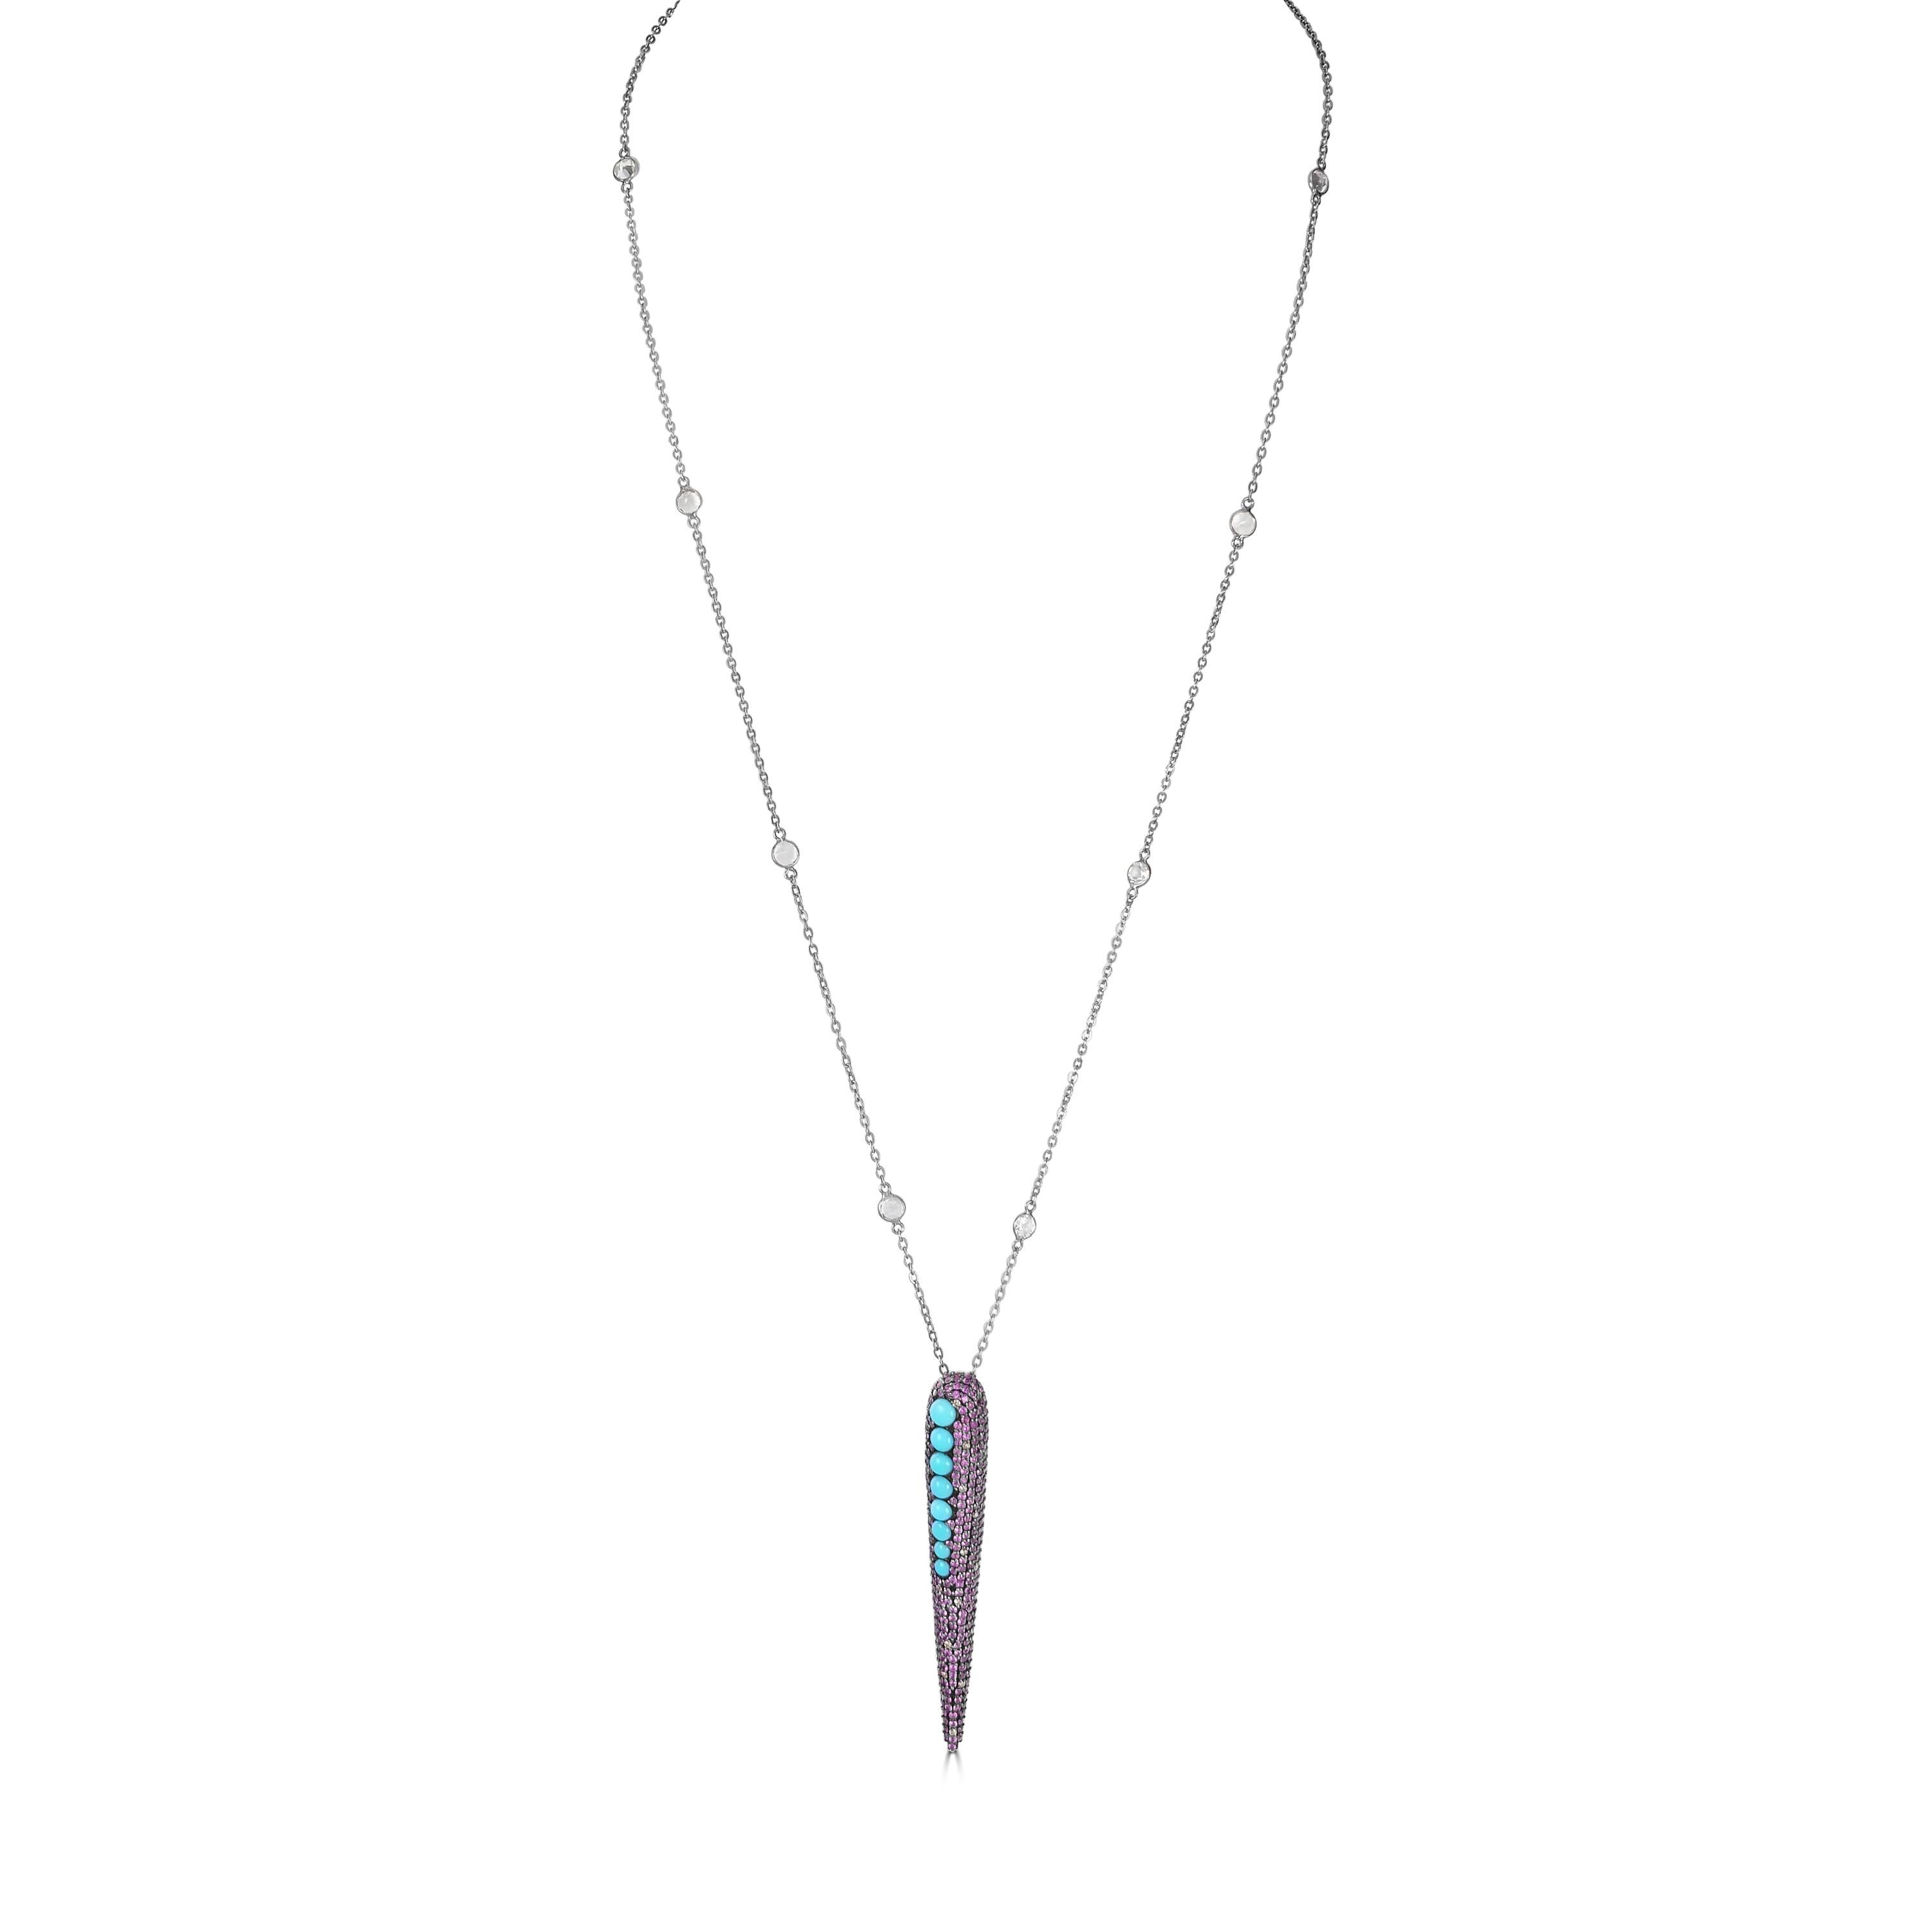 Introducing our Victorian 2.28 Cttw. Ruby, Turquoise, Topaz, and Diamond Pendant Necklace, a captivating piece that effortlessly blends elegance with bold design elements.

This exquisite pendant necklace features a 35-inch sterling silver cable